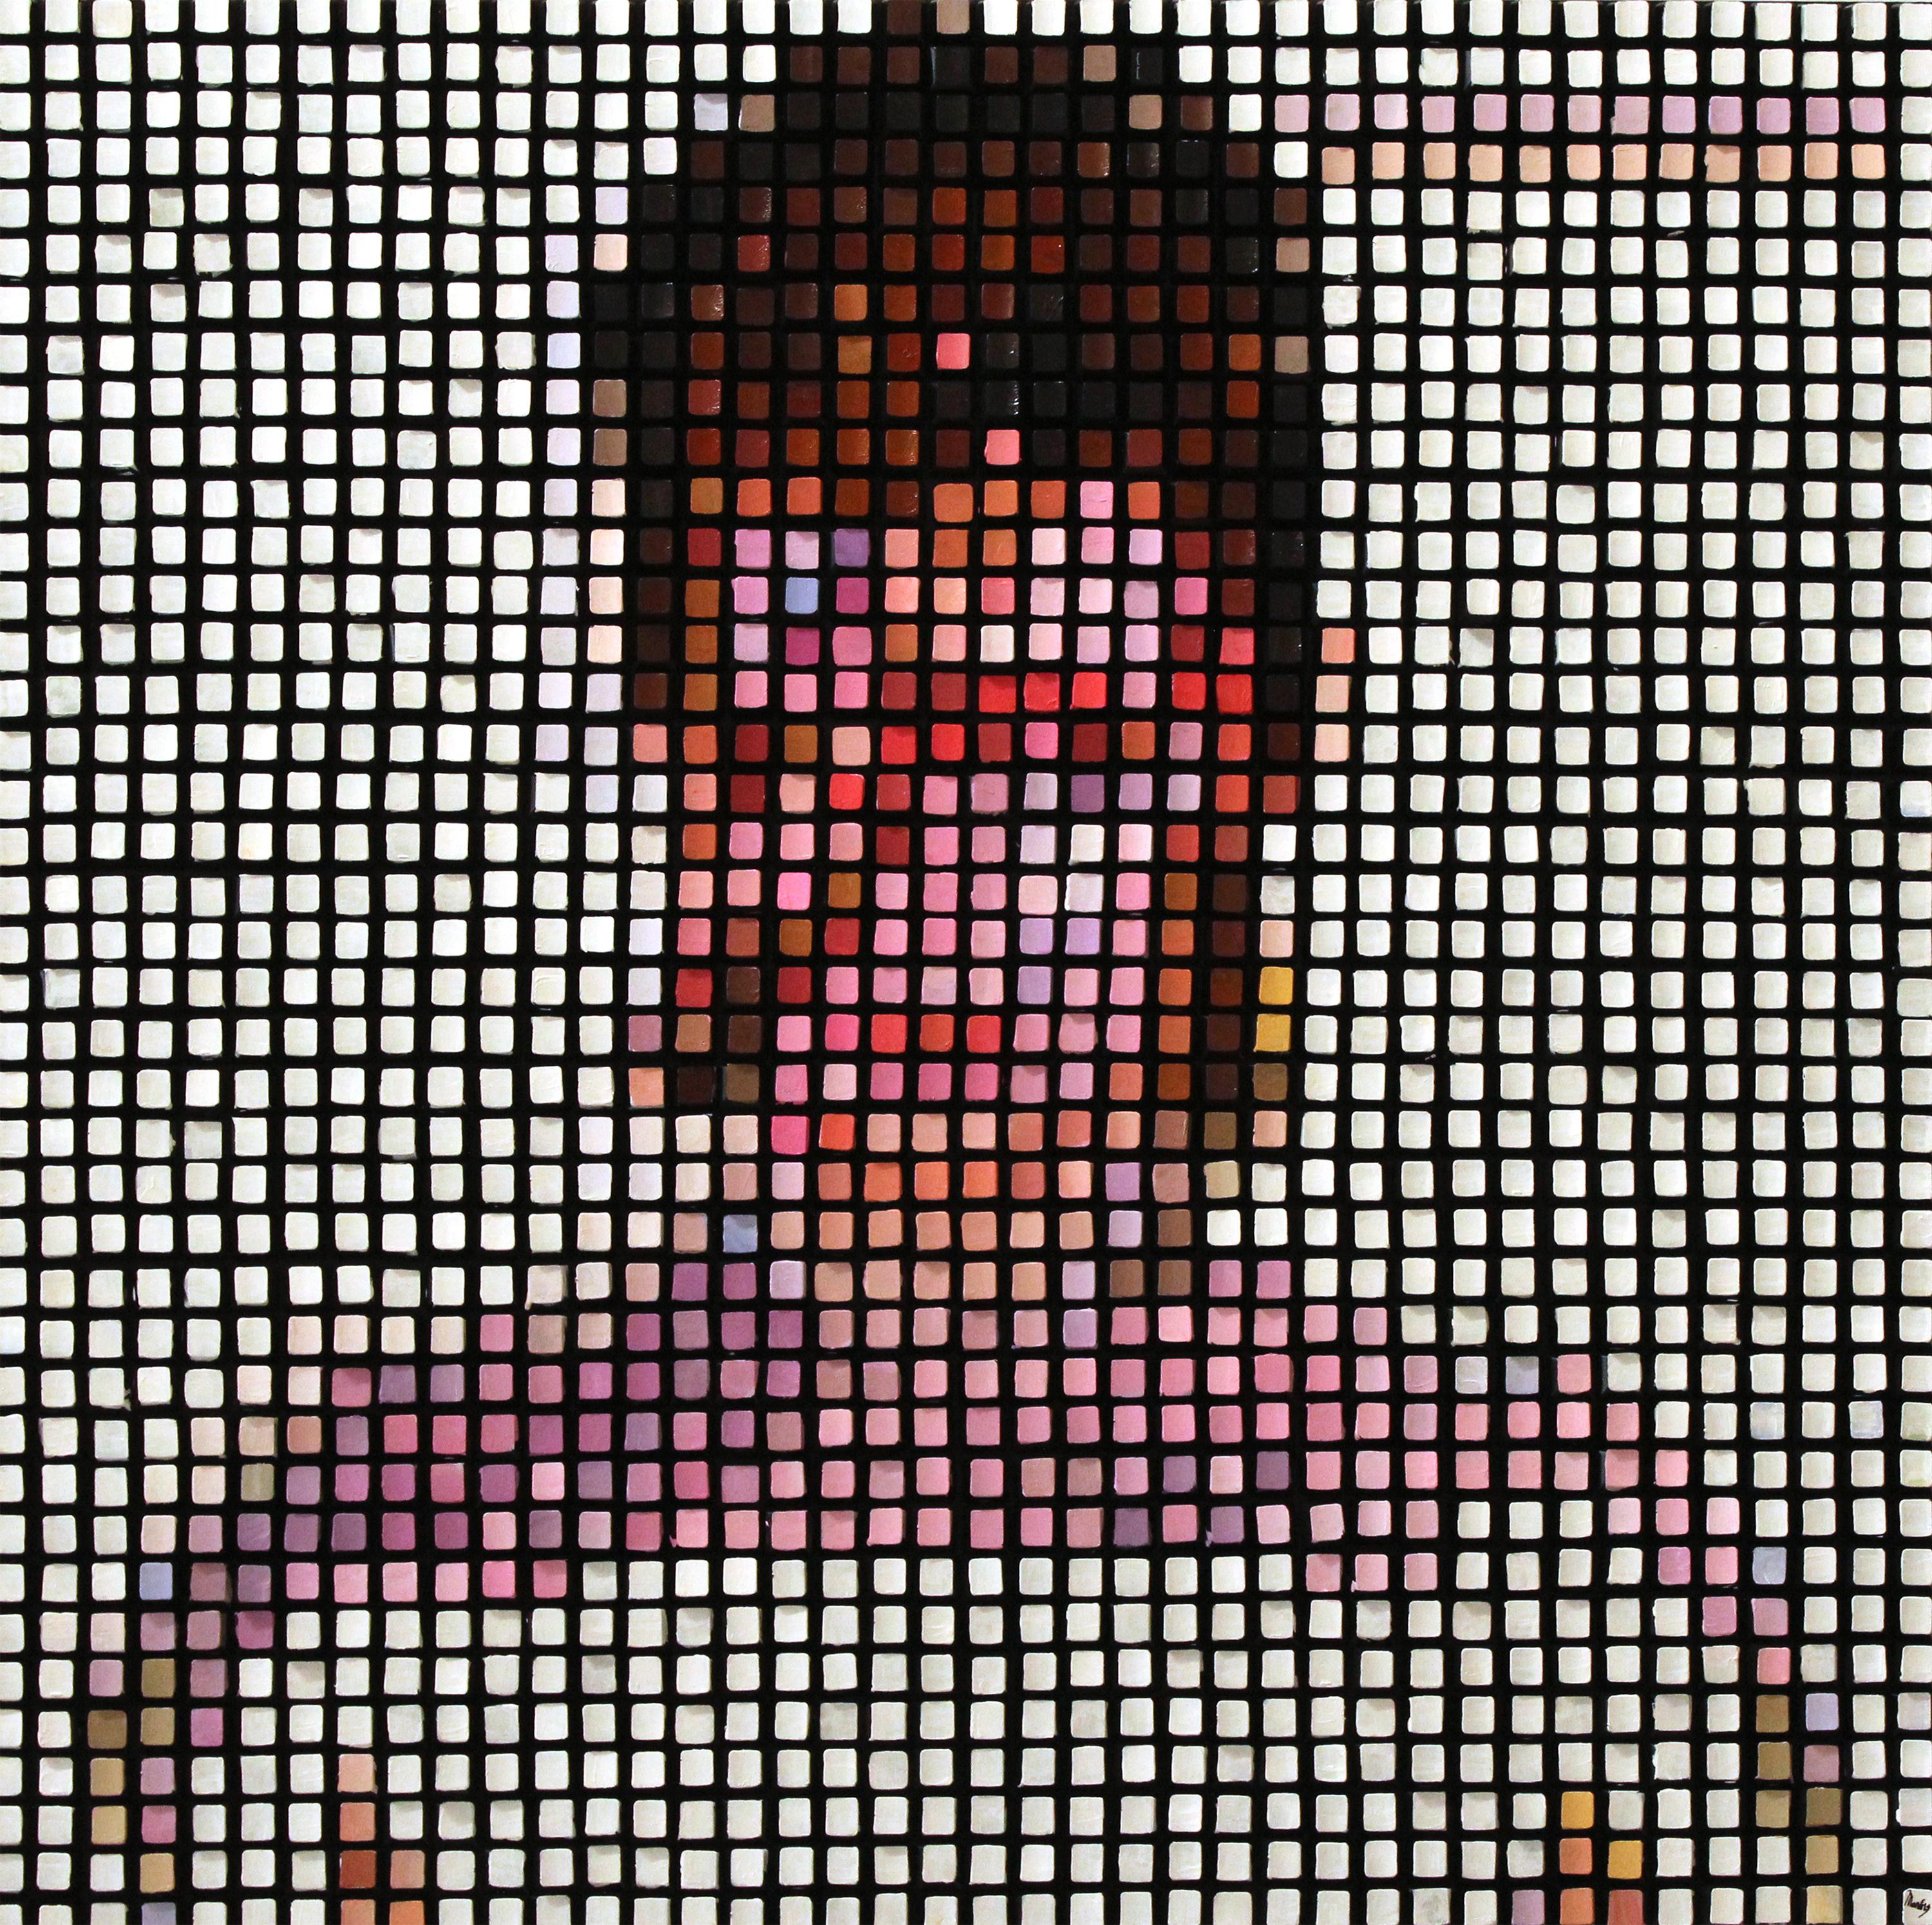 Pixel Remaster Series: Bowie, Acrylic and Keyboard Keys on Panel - Mixed Media Art by Georges Monfils